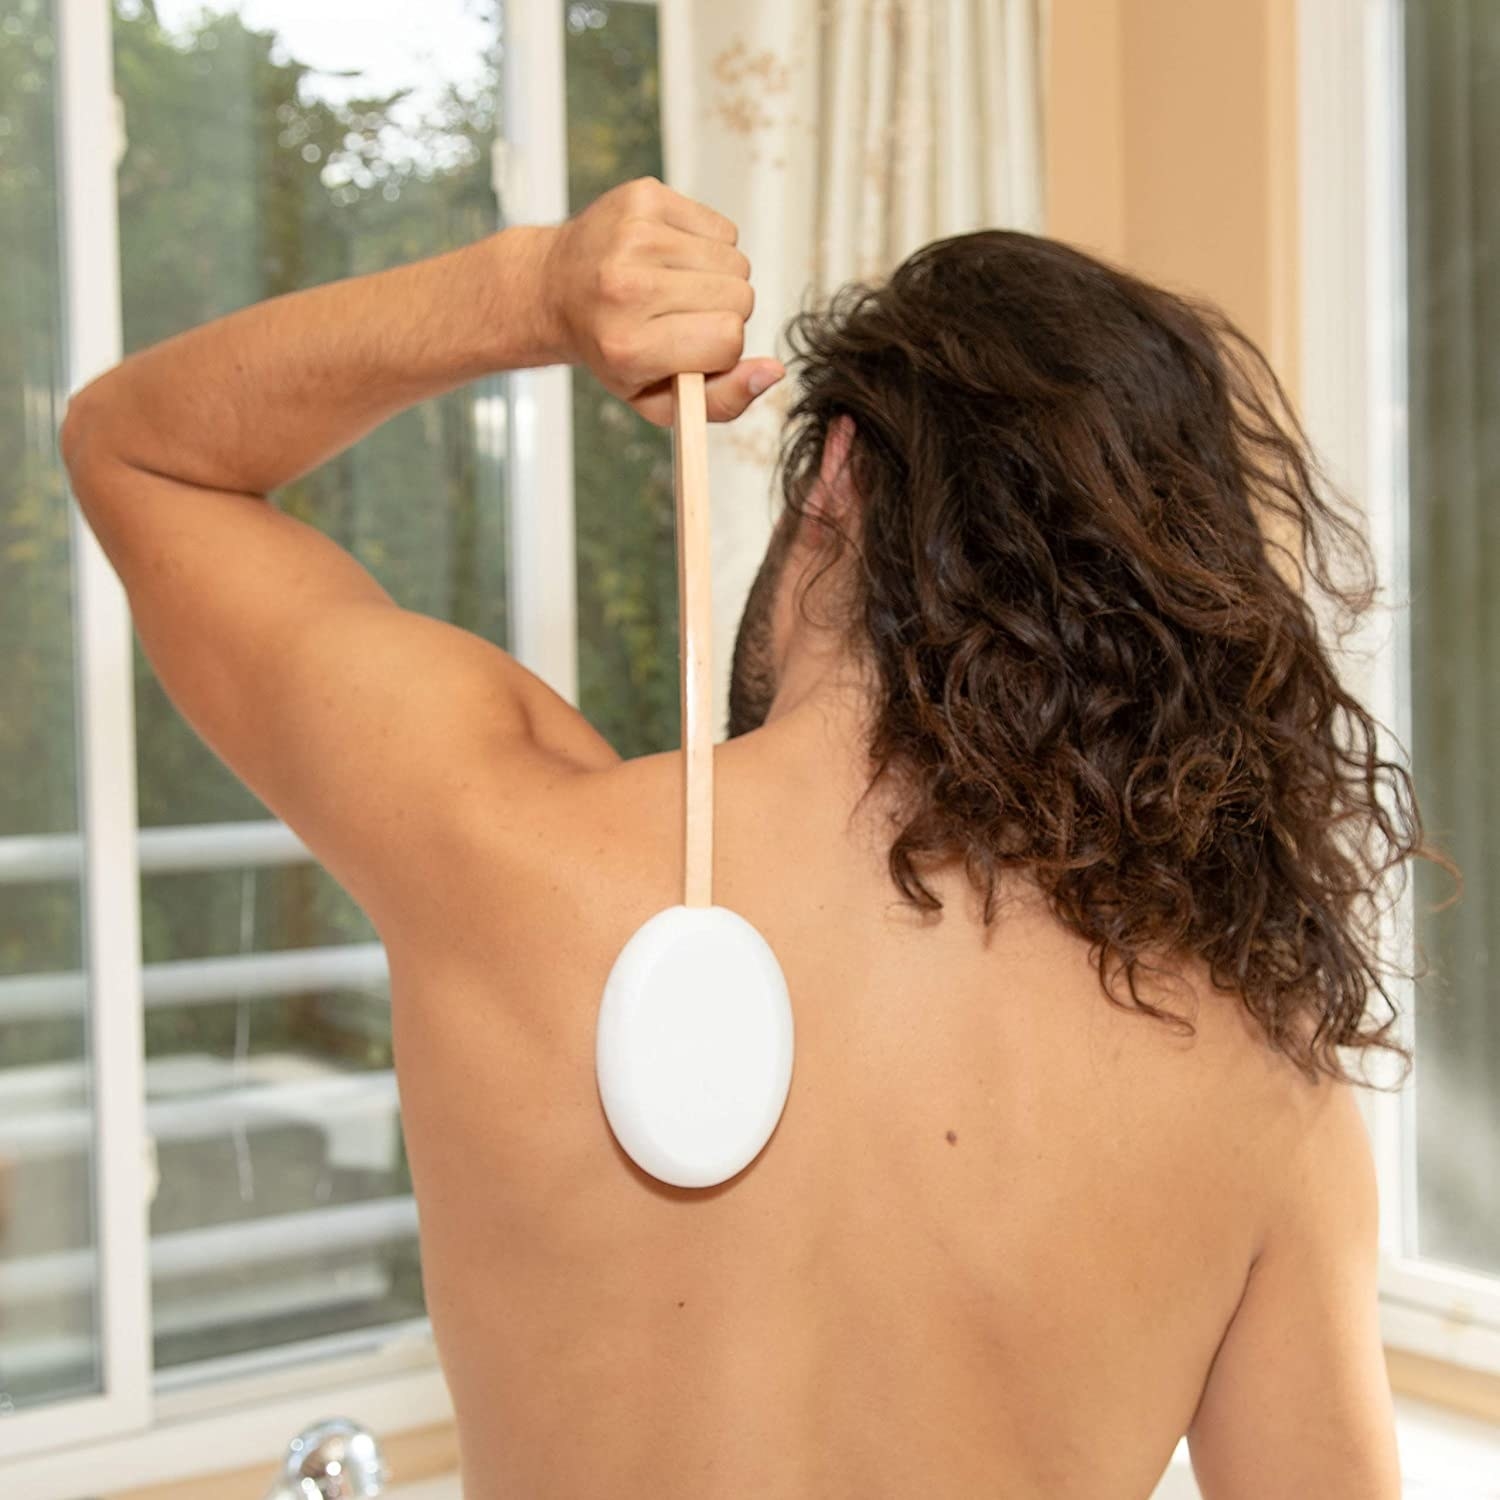 A person using the lotion applicator to put cream on their back